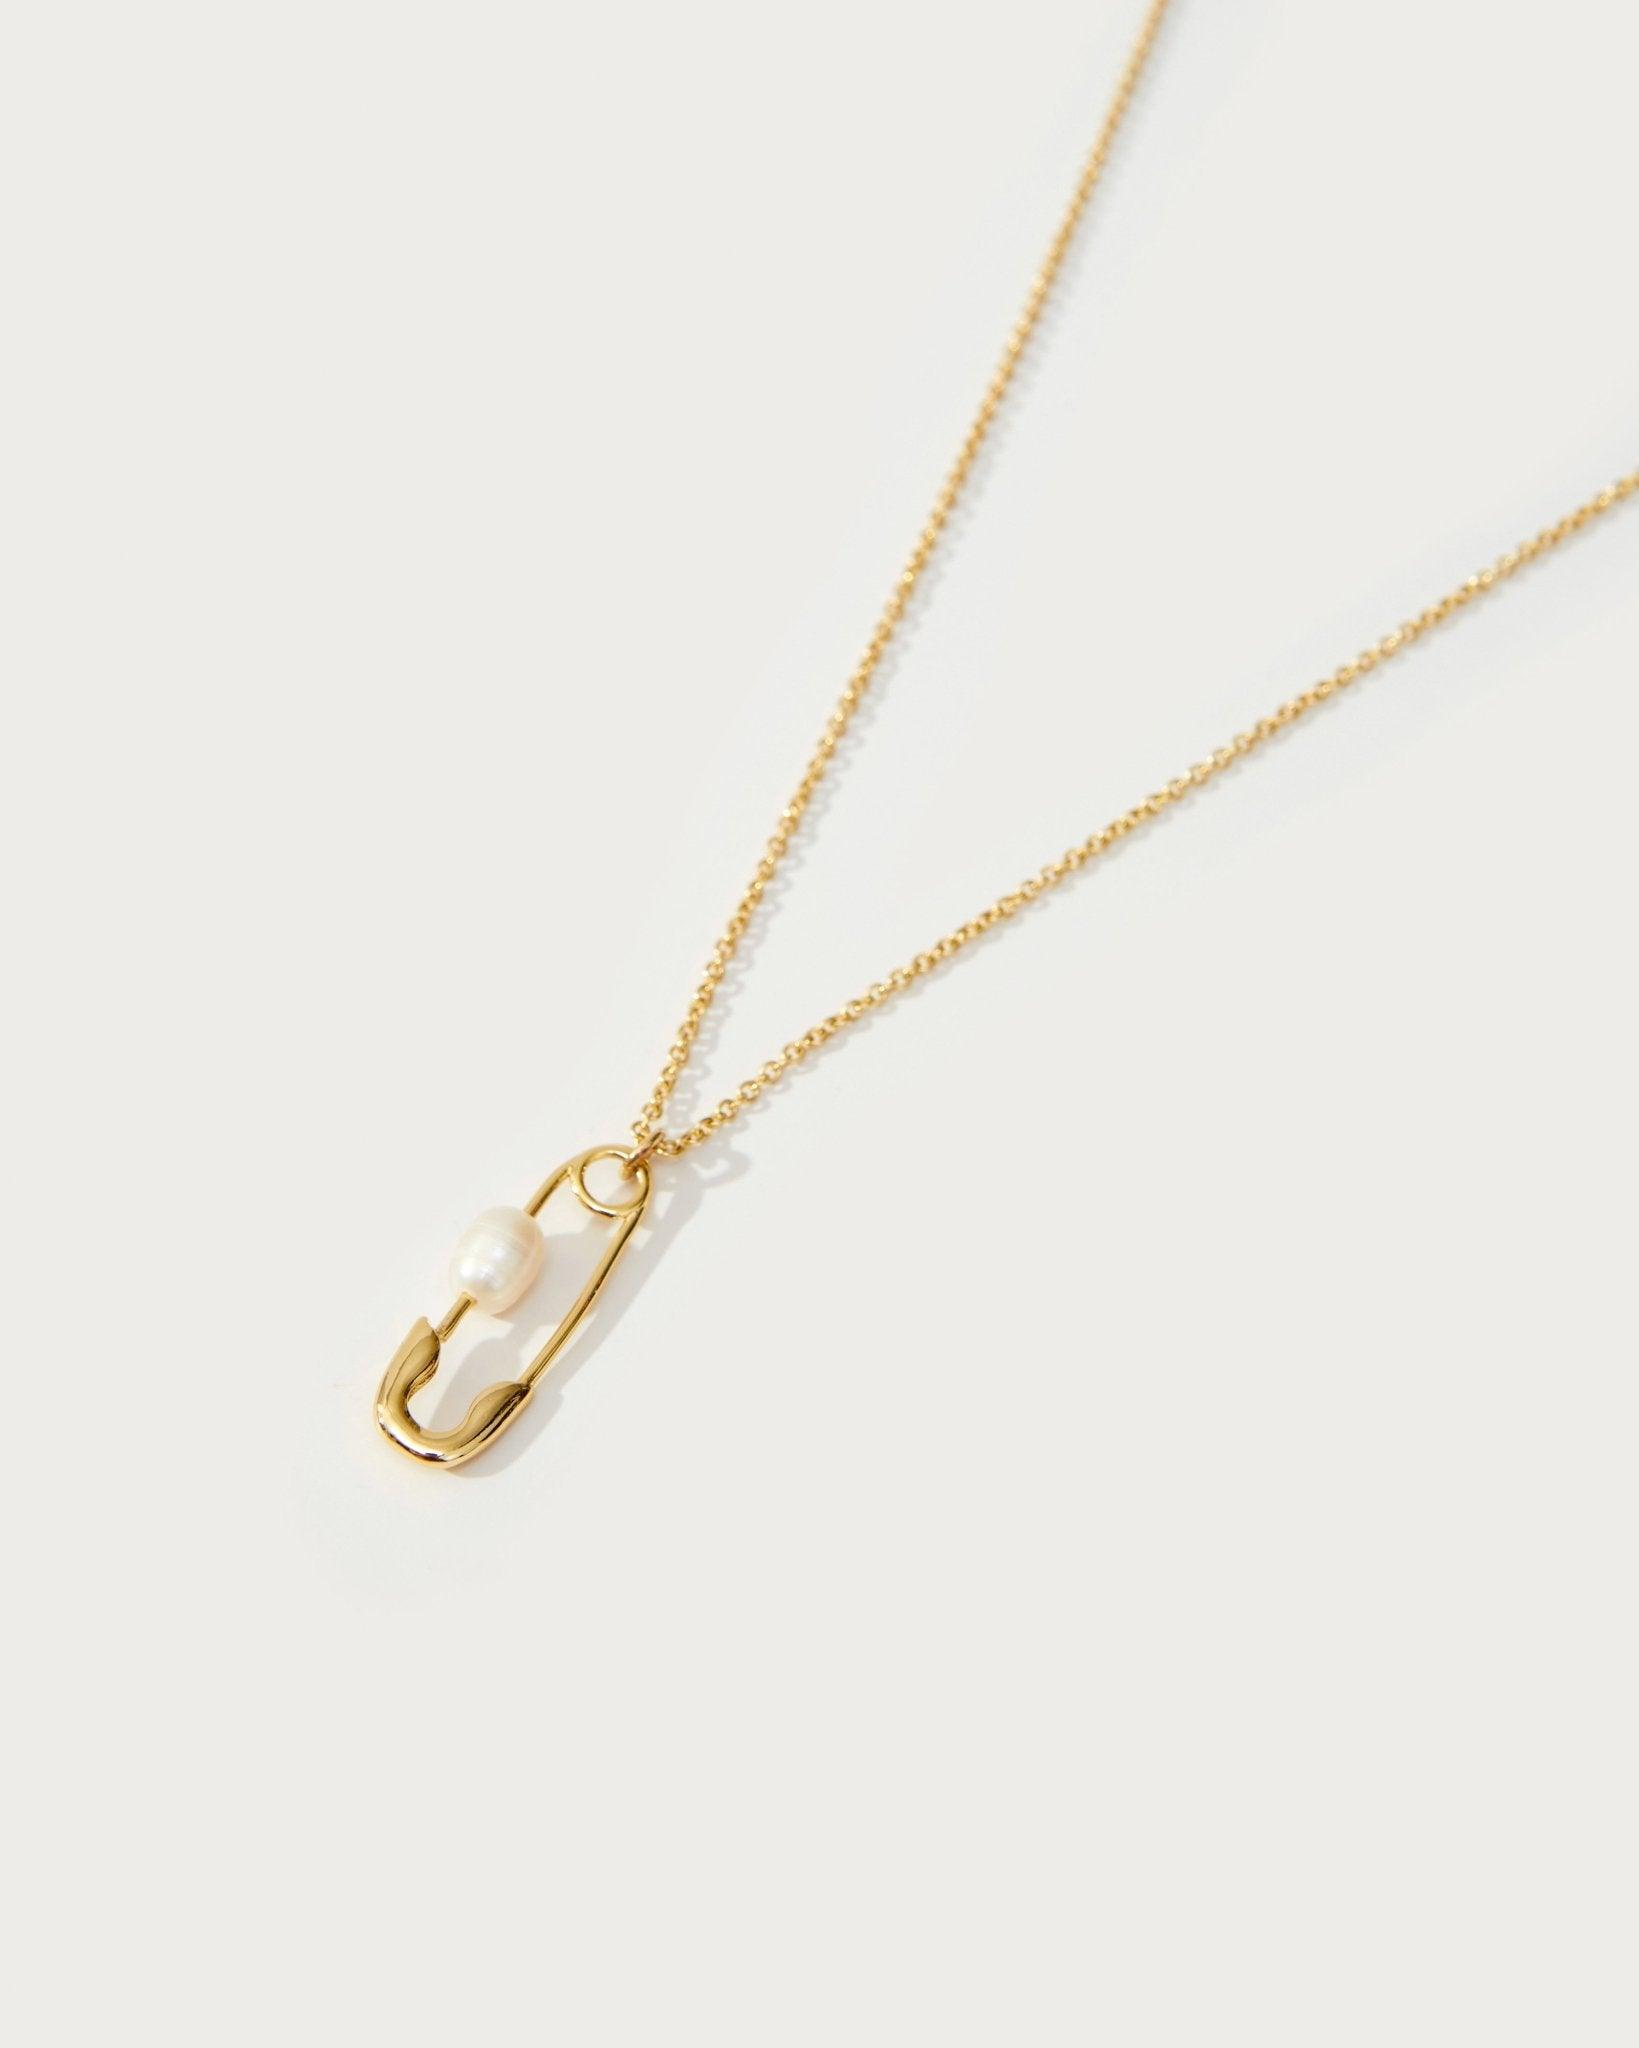 Safety Pin Necklace - En Route Jewelry